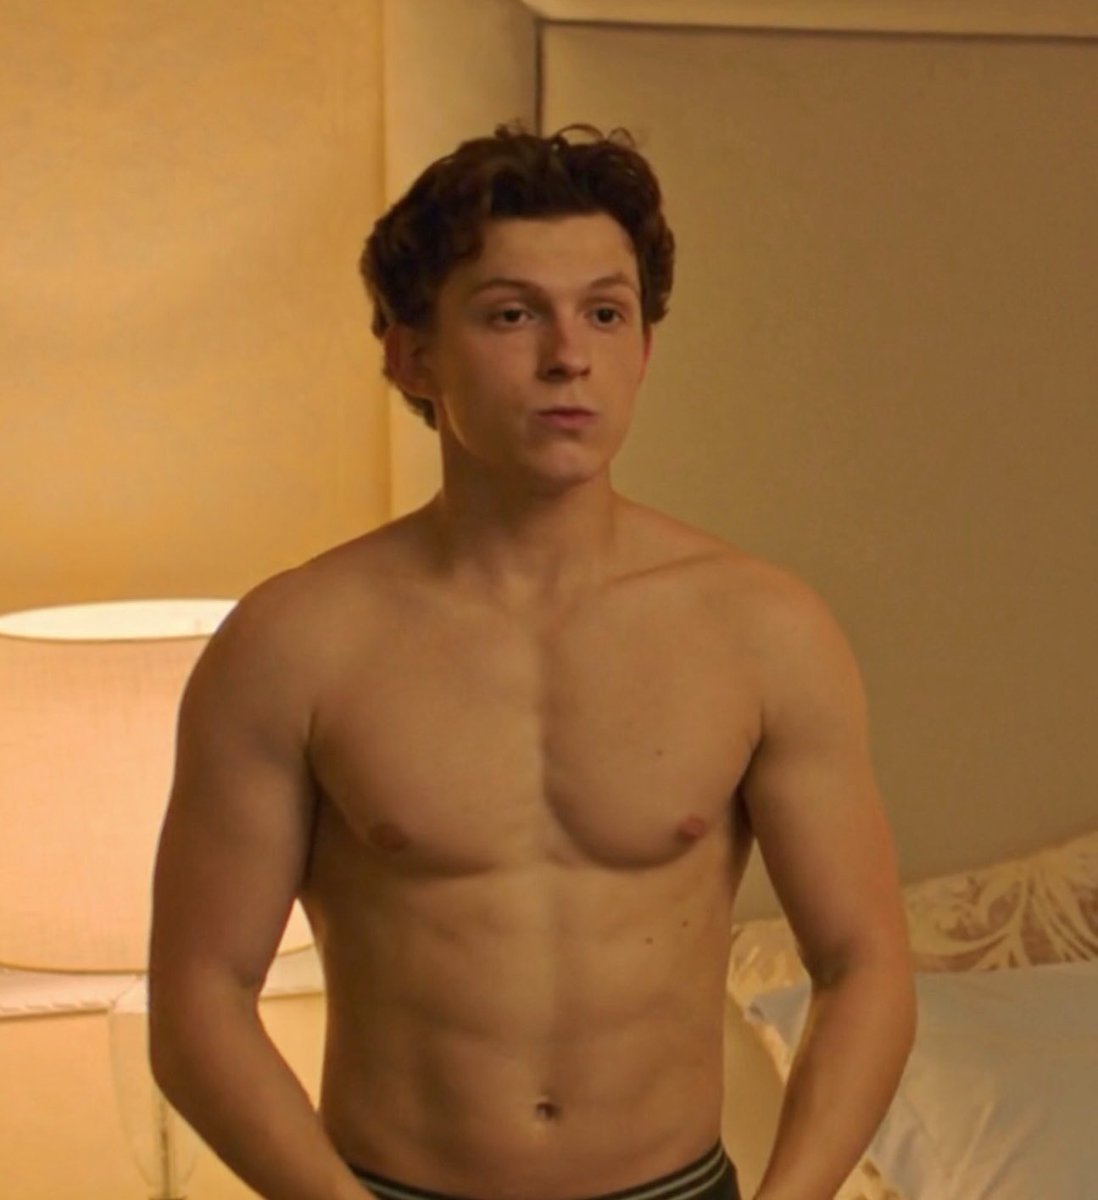 Suradam Isaac majs SuperficialGuys on Twitter: "TOM HOLLAND SHIRTLESS AND BUTT - IN SPIDERMAN  far from home https://t.co/votrVBbIXn https://t.co/SeB4G3Gy3M" / X